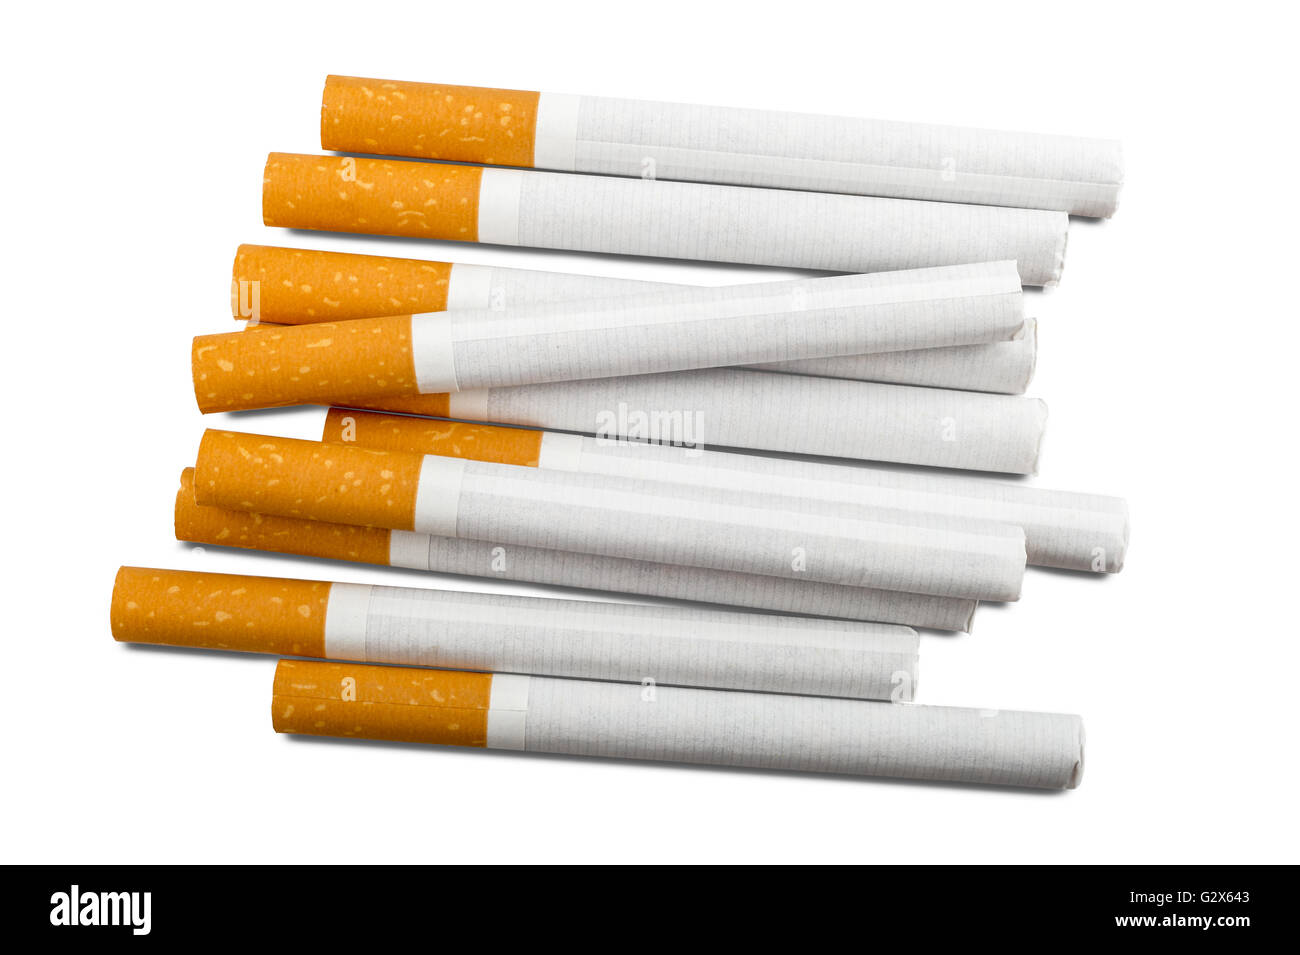 Top view of a pile of cigarettes over white background Stock Photo